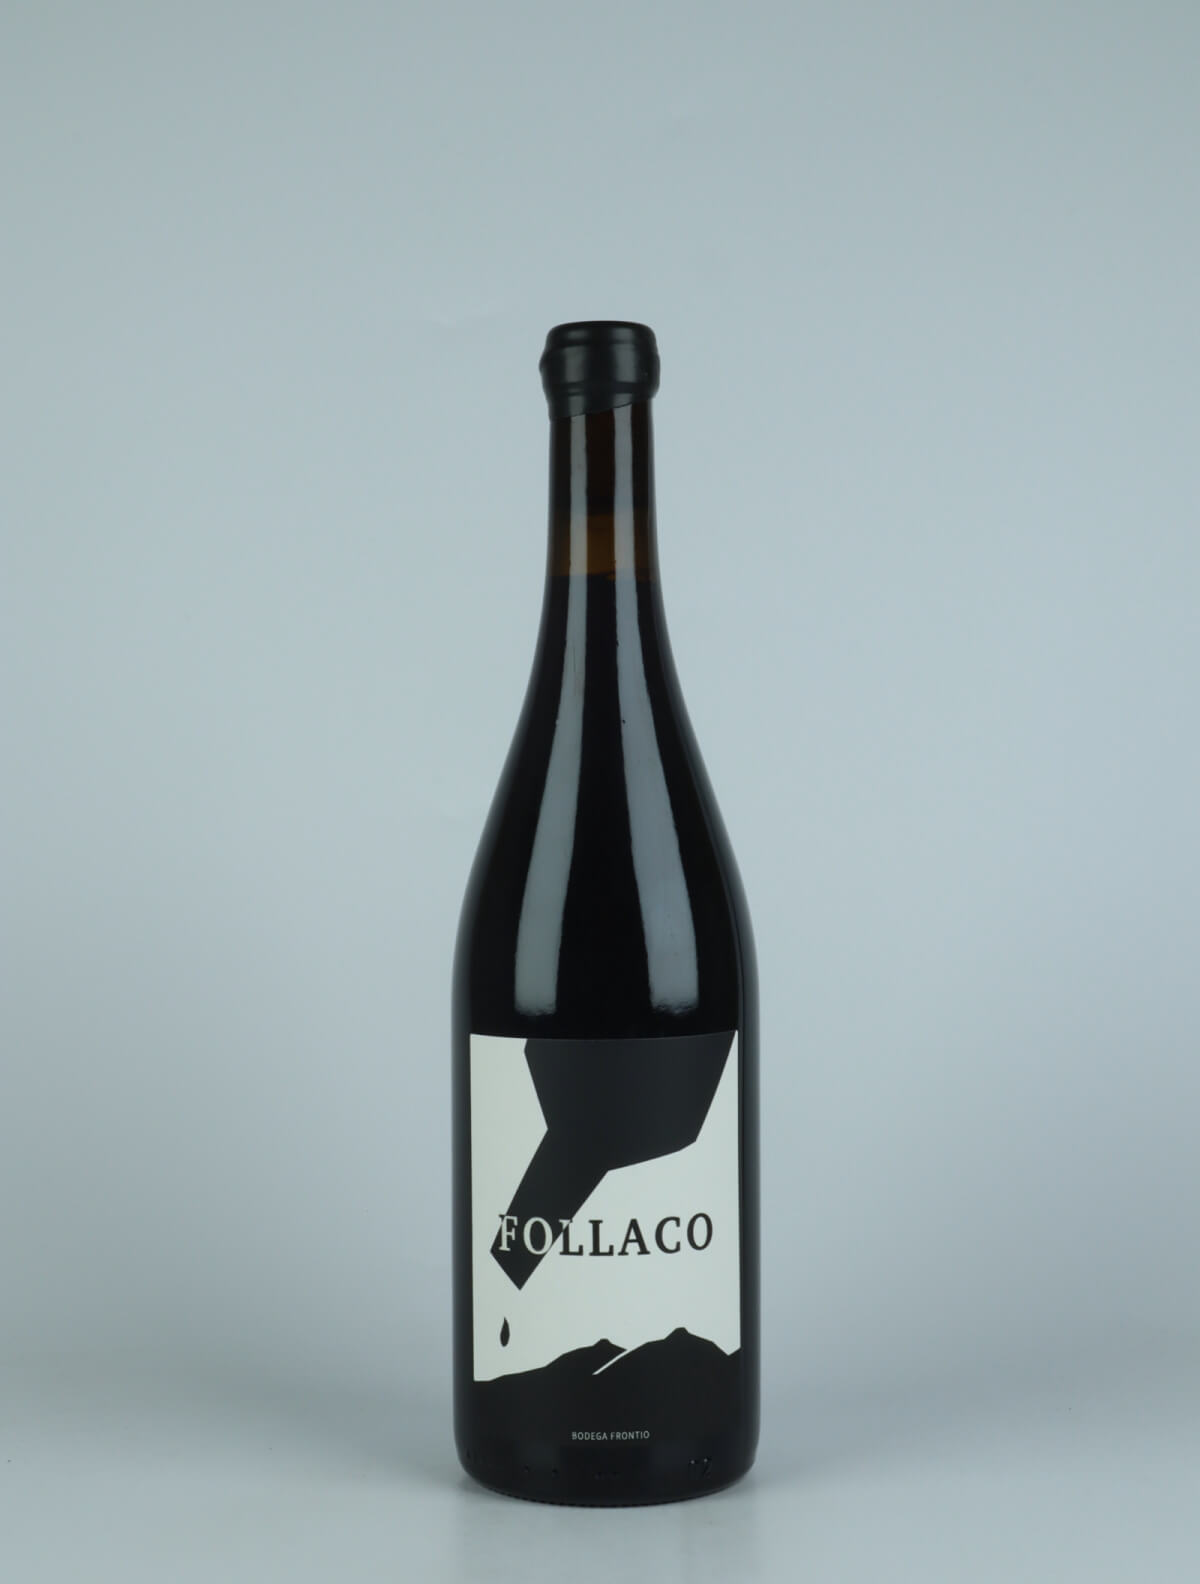 A bottle 2022 Follaco Red wine from Bodega Frontio, Arribes in Spain